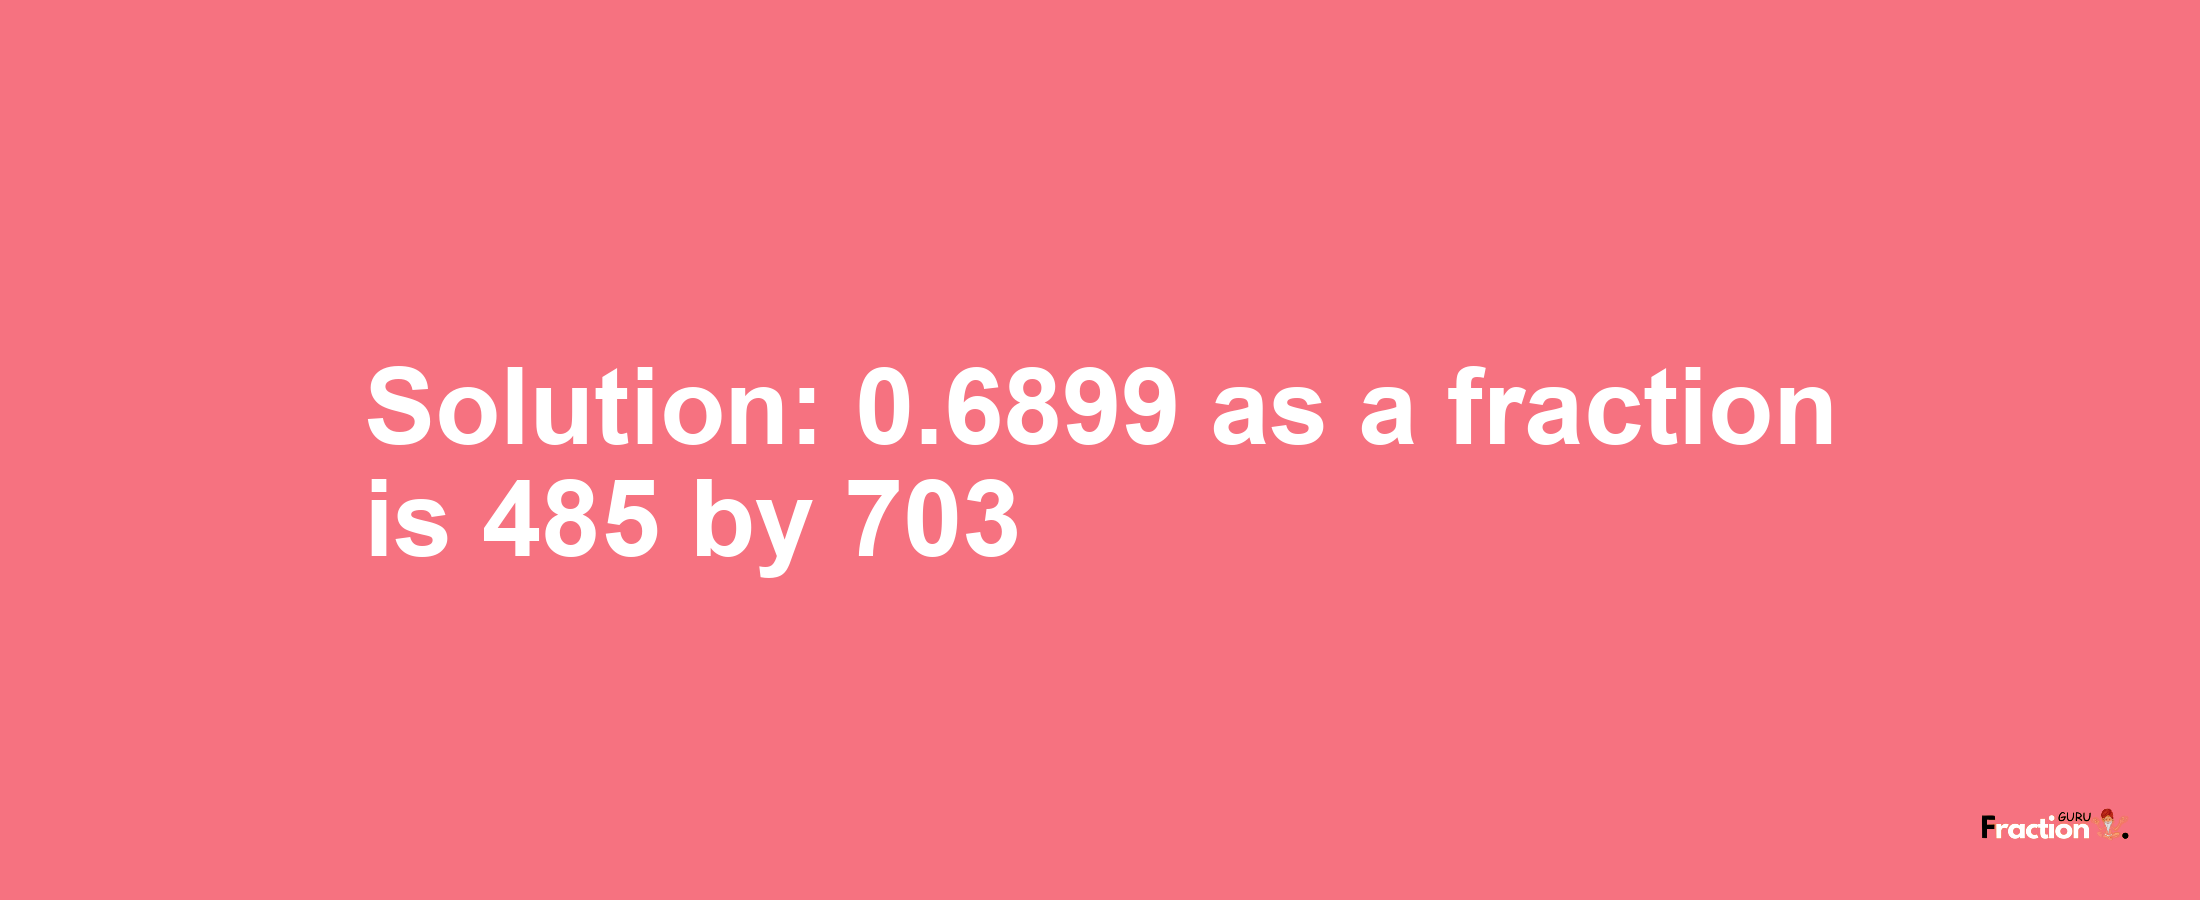 Solution:0.6899 as a fraction is 485/703